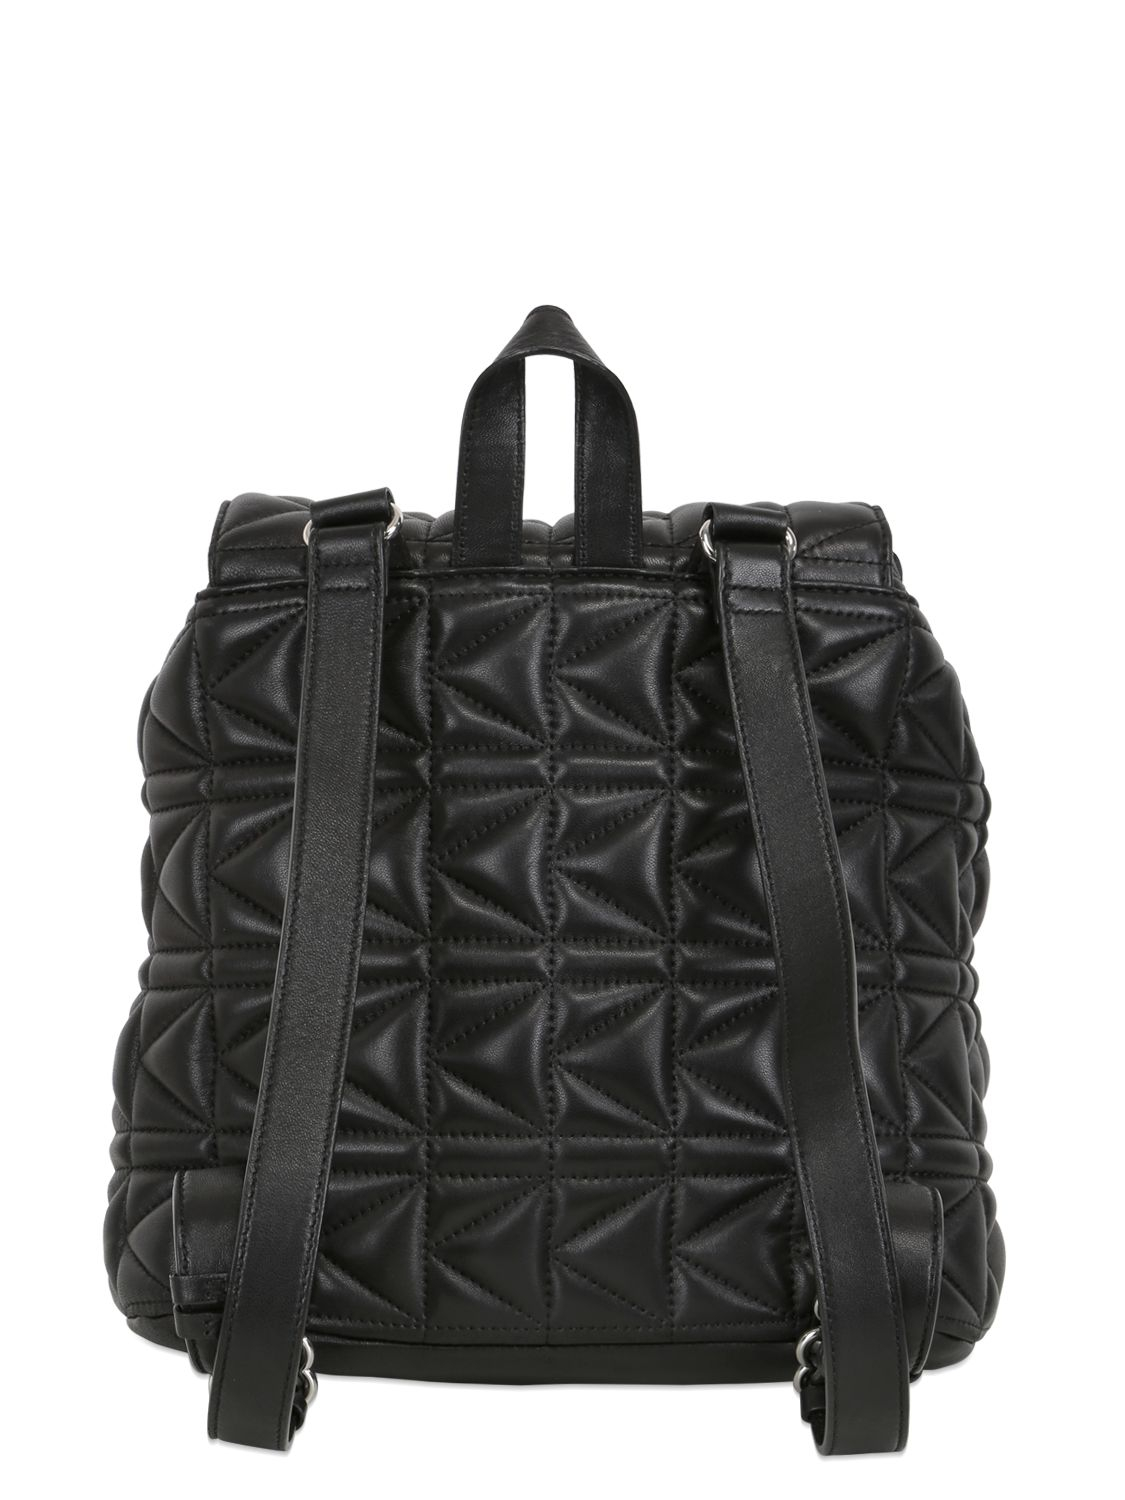 Lyst - Karl Lagerfeld Kuilted Nappa Leather Backpack in Black for Men